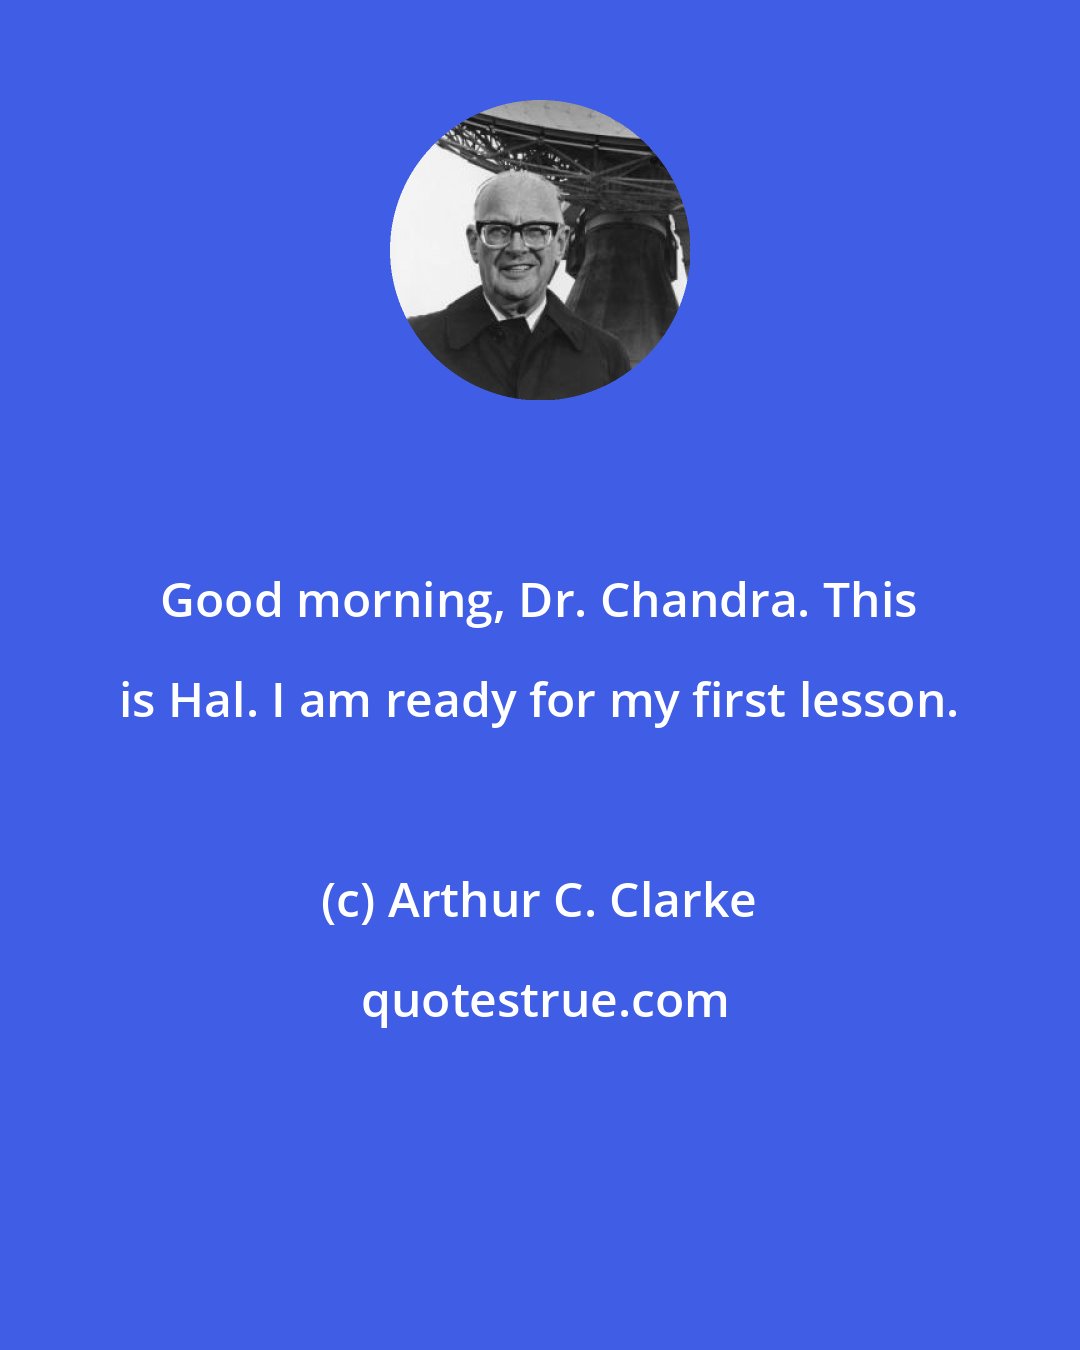 Arthur C. Clarke: Good morning, Dr. Chandra. This is Hal. I am ready for my first lesson.